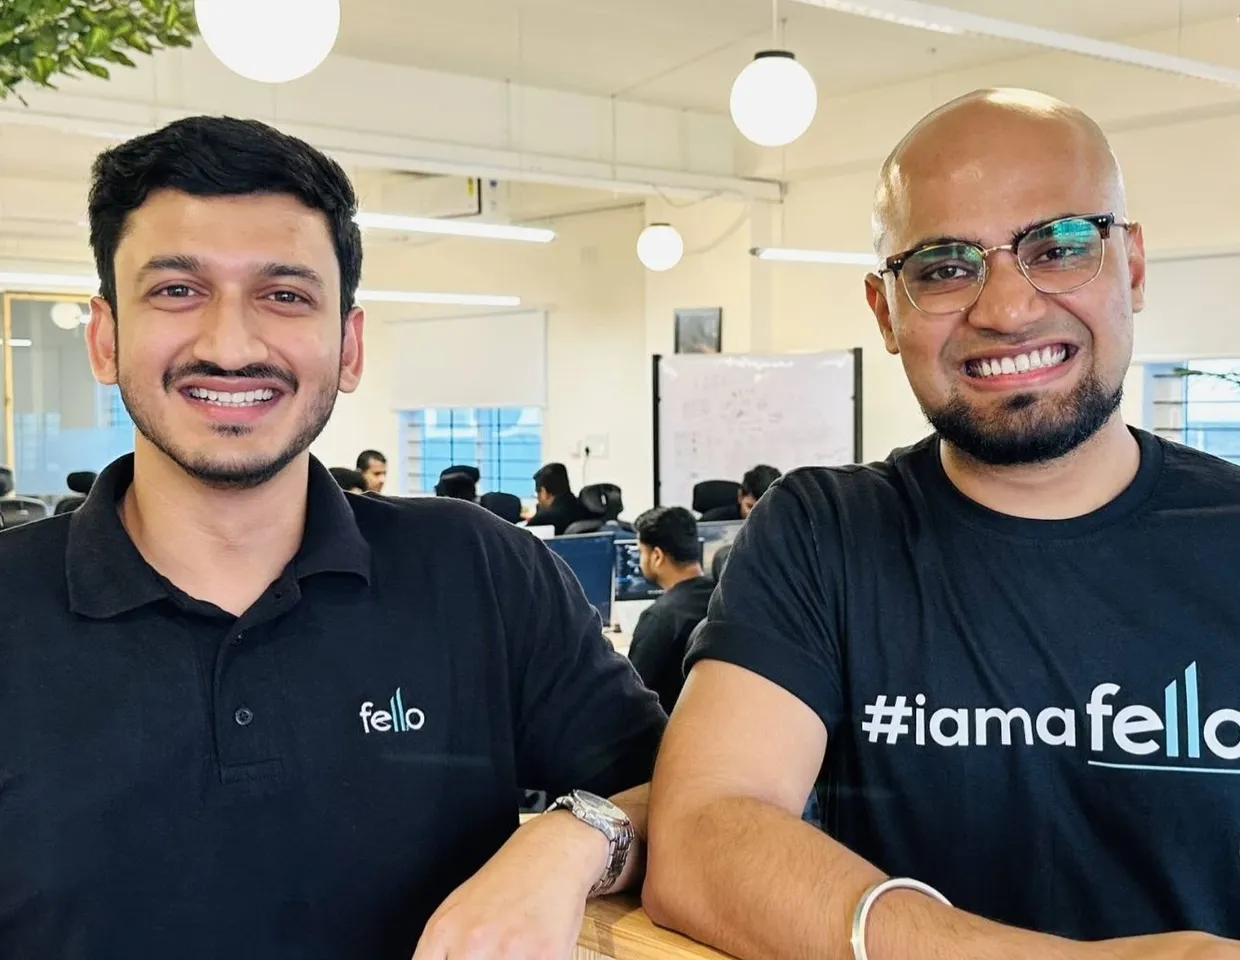 Gamified fintech startup Fello raises $4M led by US-based Courtside Ventures